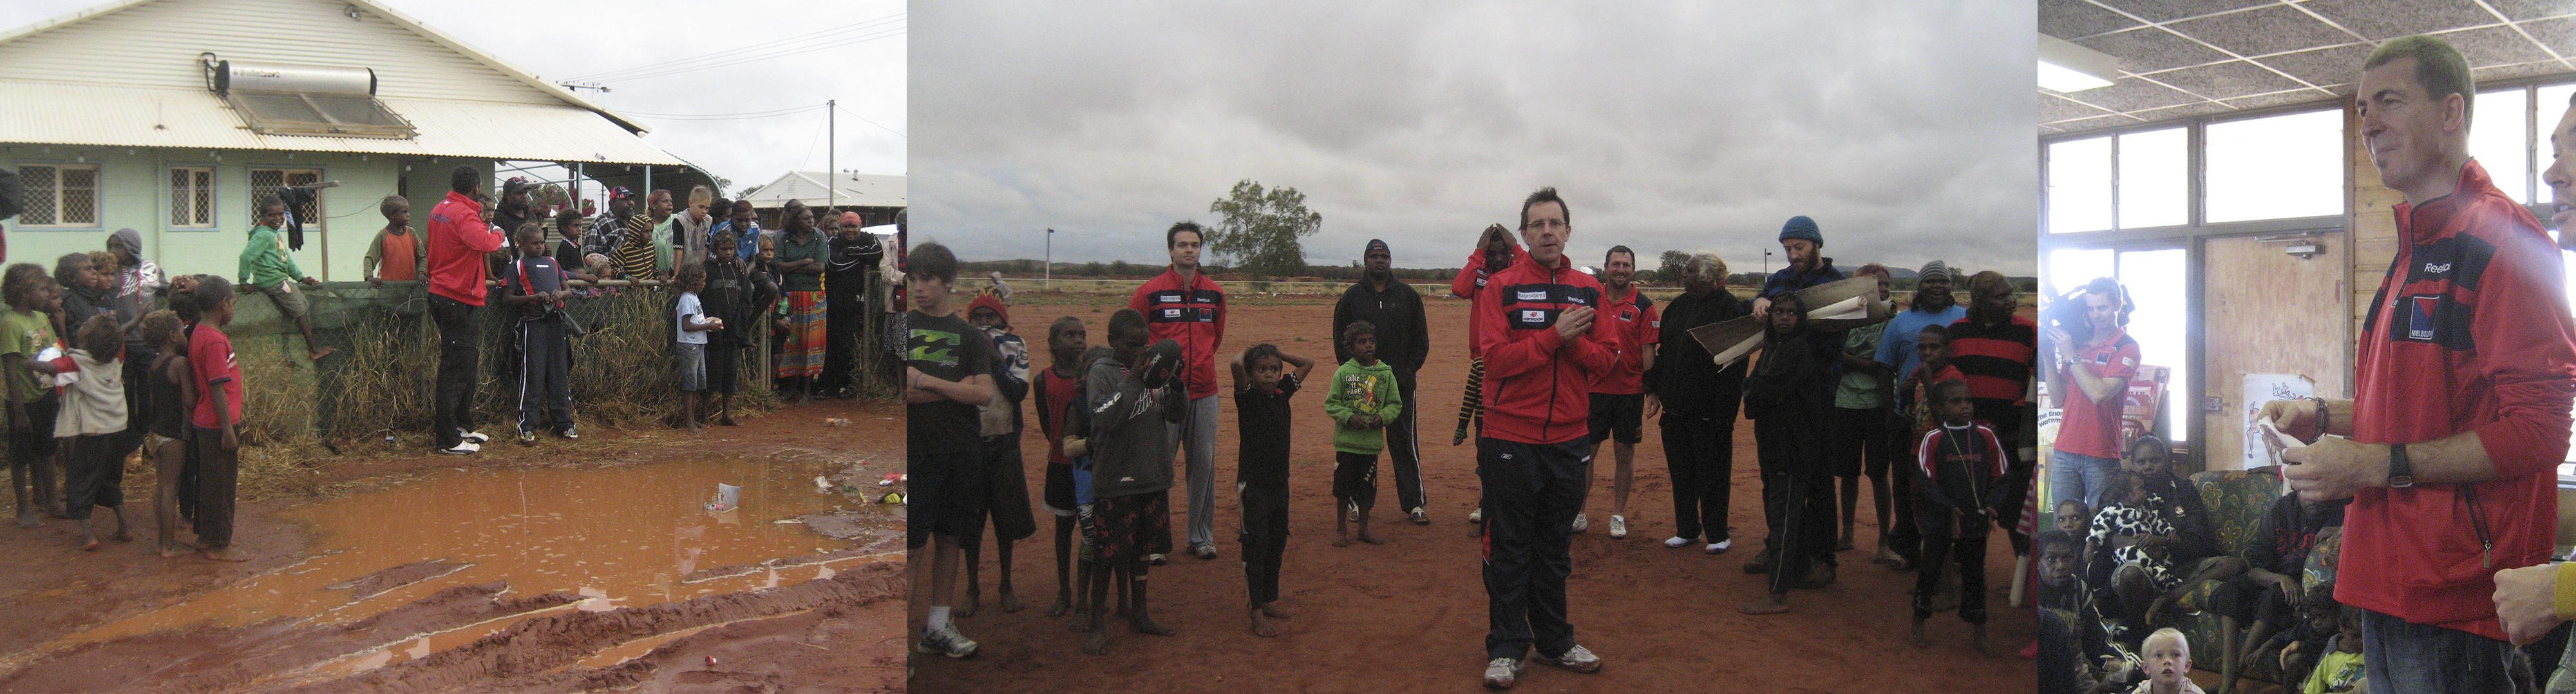 images of MFC visiting Yuendumu in 2010